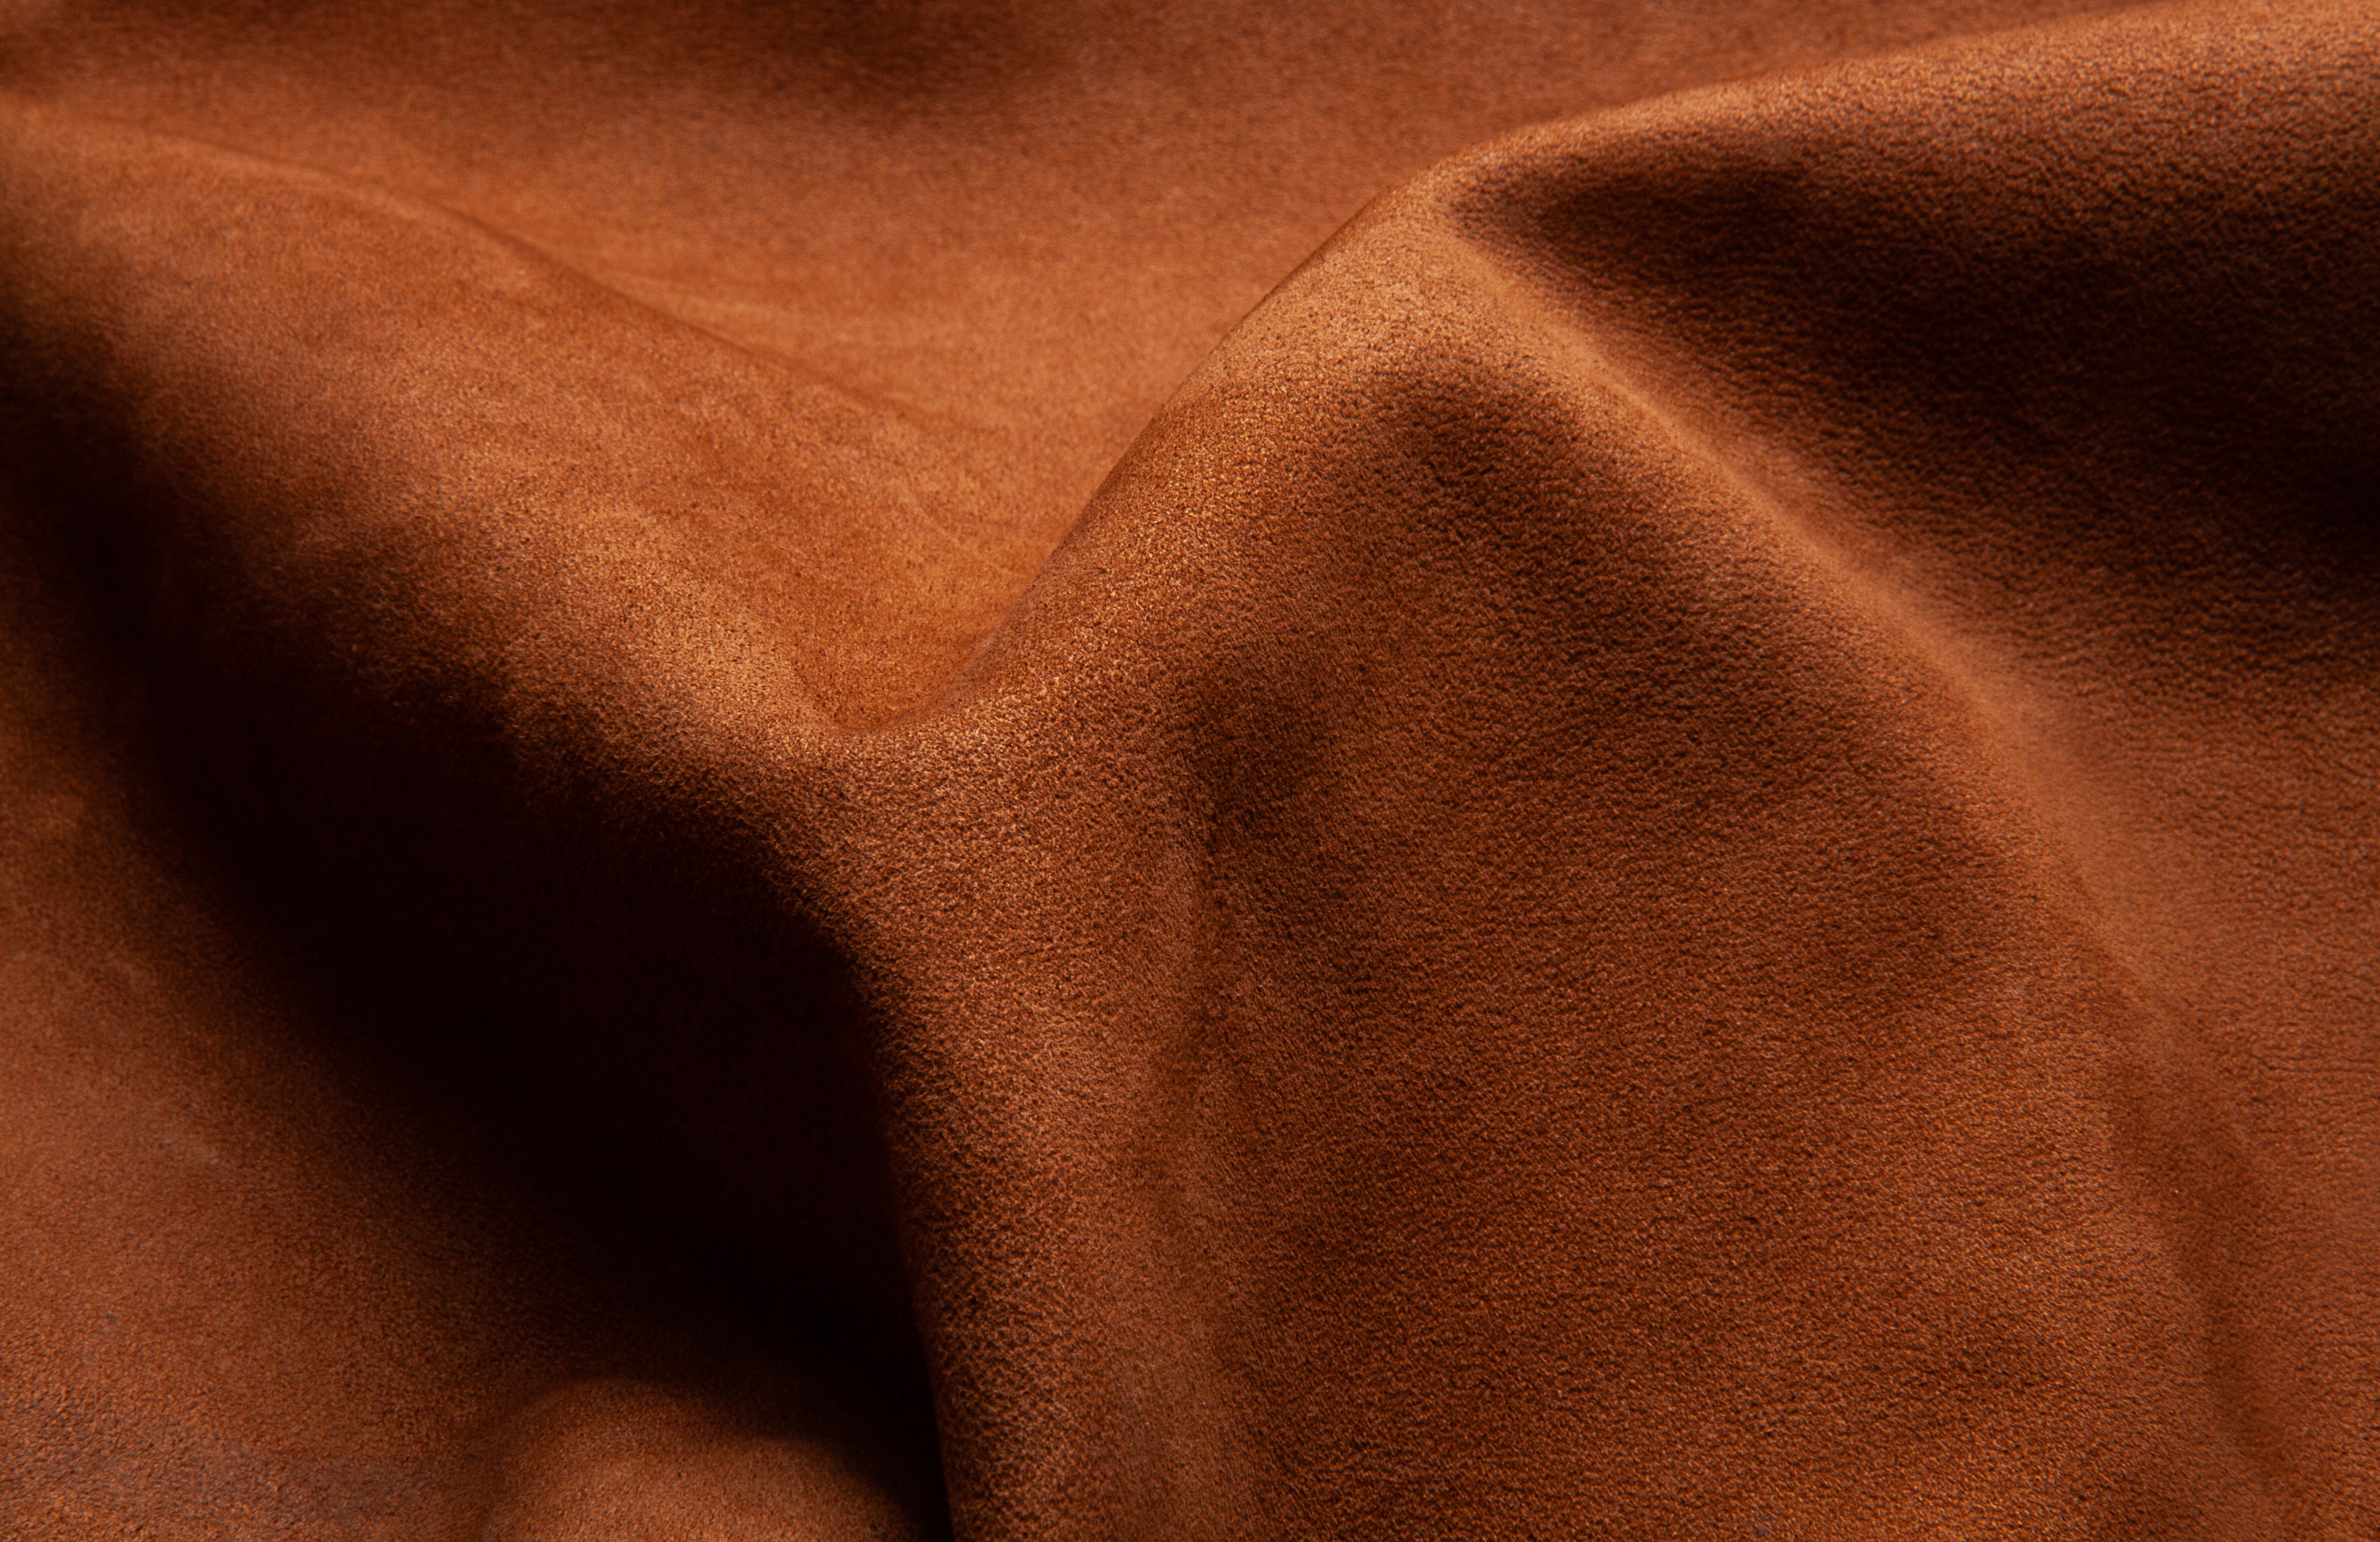 brown, texture, textures, folds, pleating, leather, skin